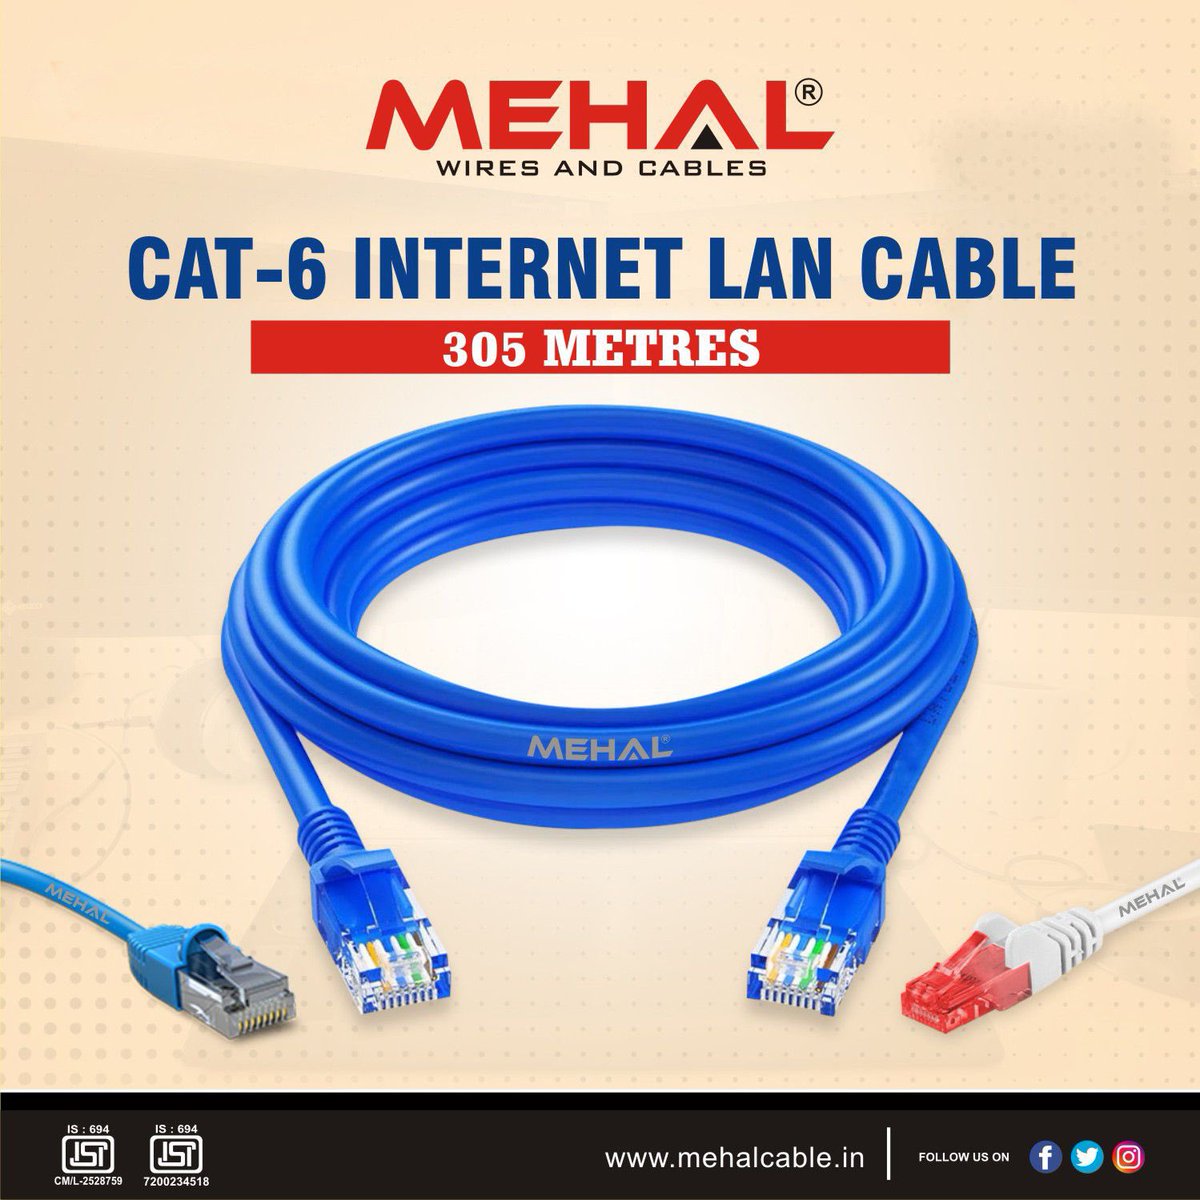 MEHAL CAT-6 INTERNET LAN CABLE 💻⌨️🖥️🛜🧑‍💻 #mehal #switchtomehalwires #cat6  #cat6cable #cat6acabling #internet #wifi #fibercable #electricallife #project #5g #5gnetwork mehalcable.in